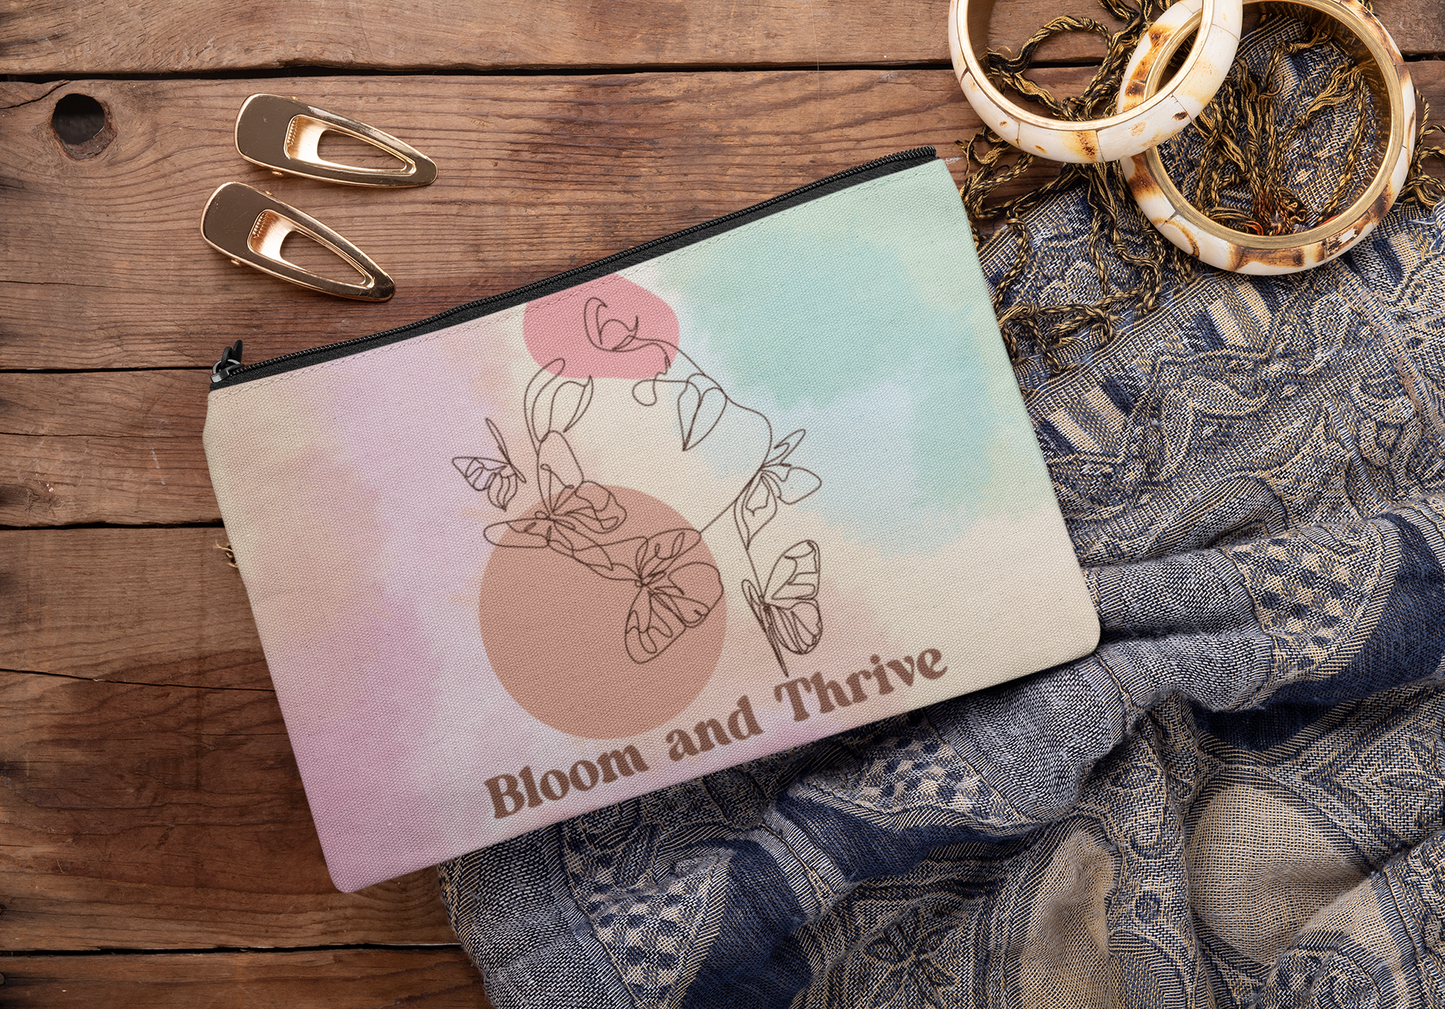 Bloom And Thrive  Pouch